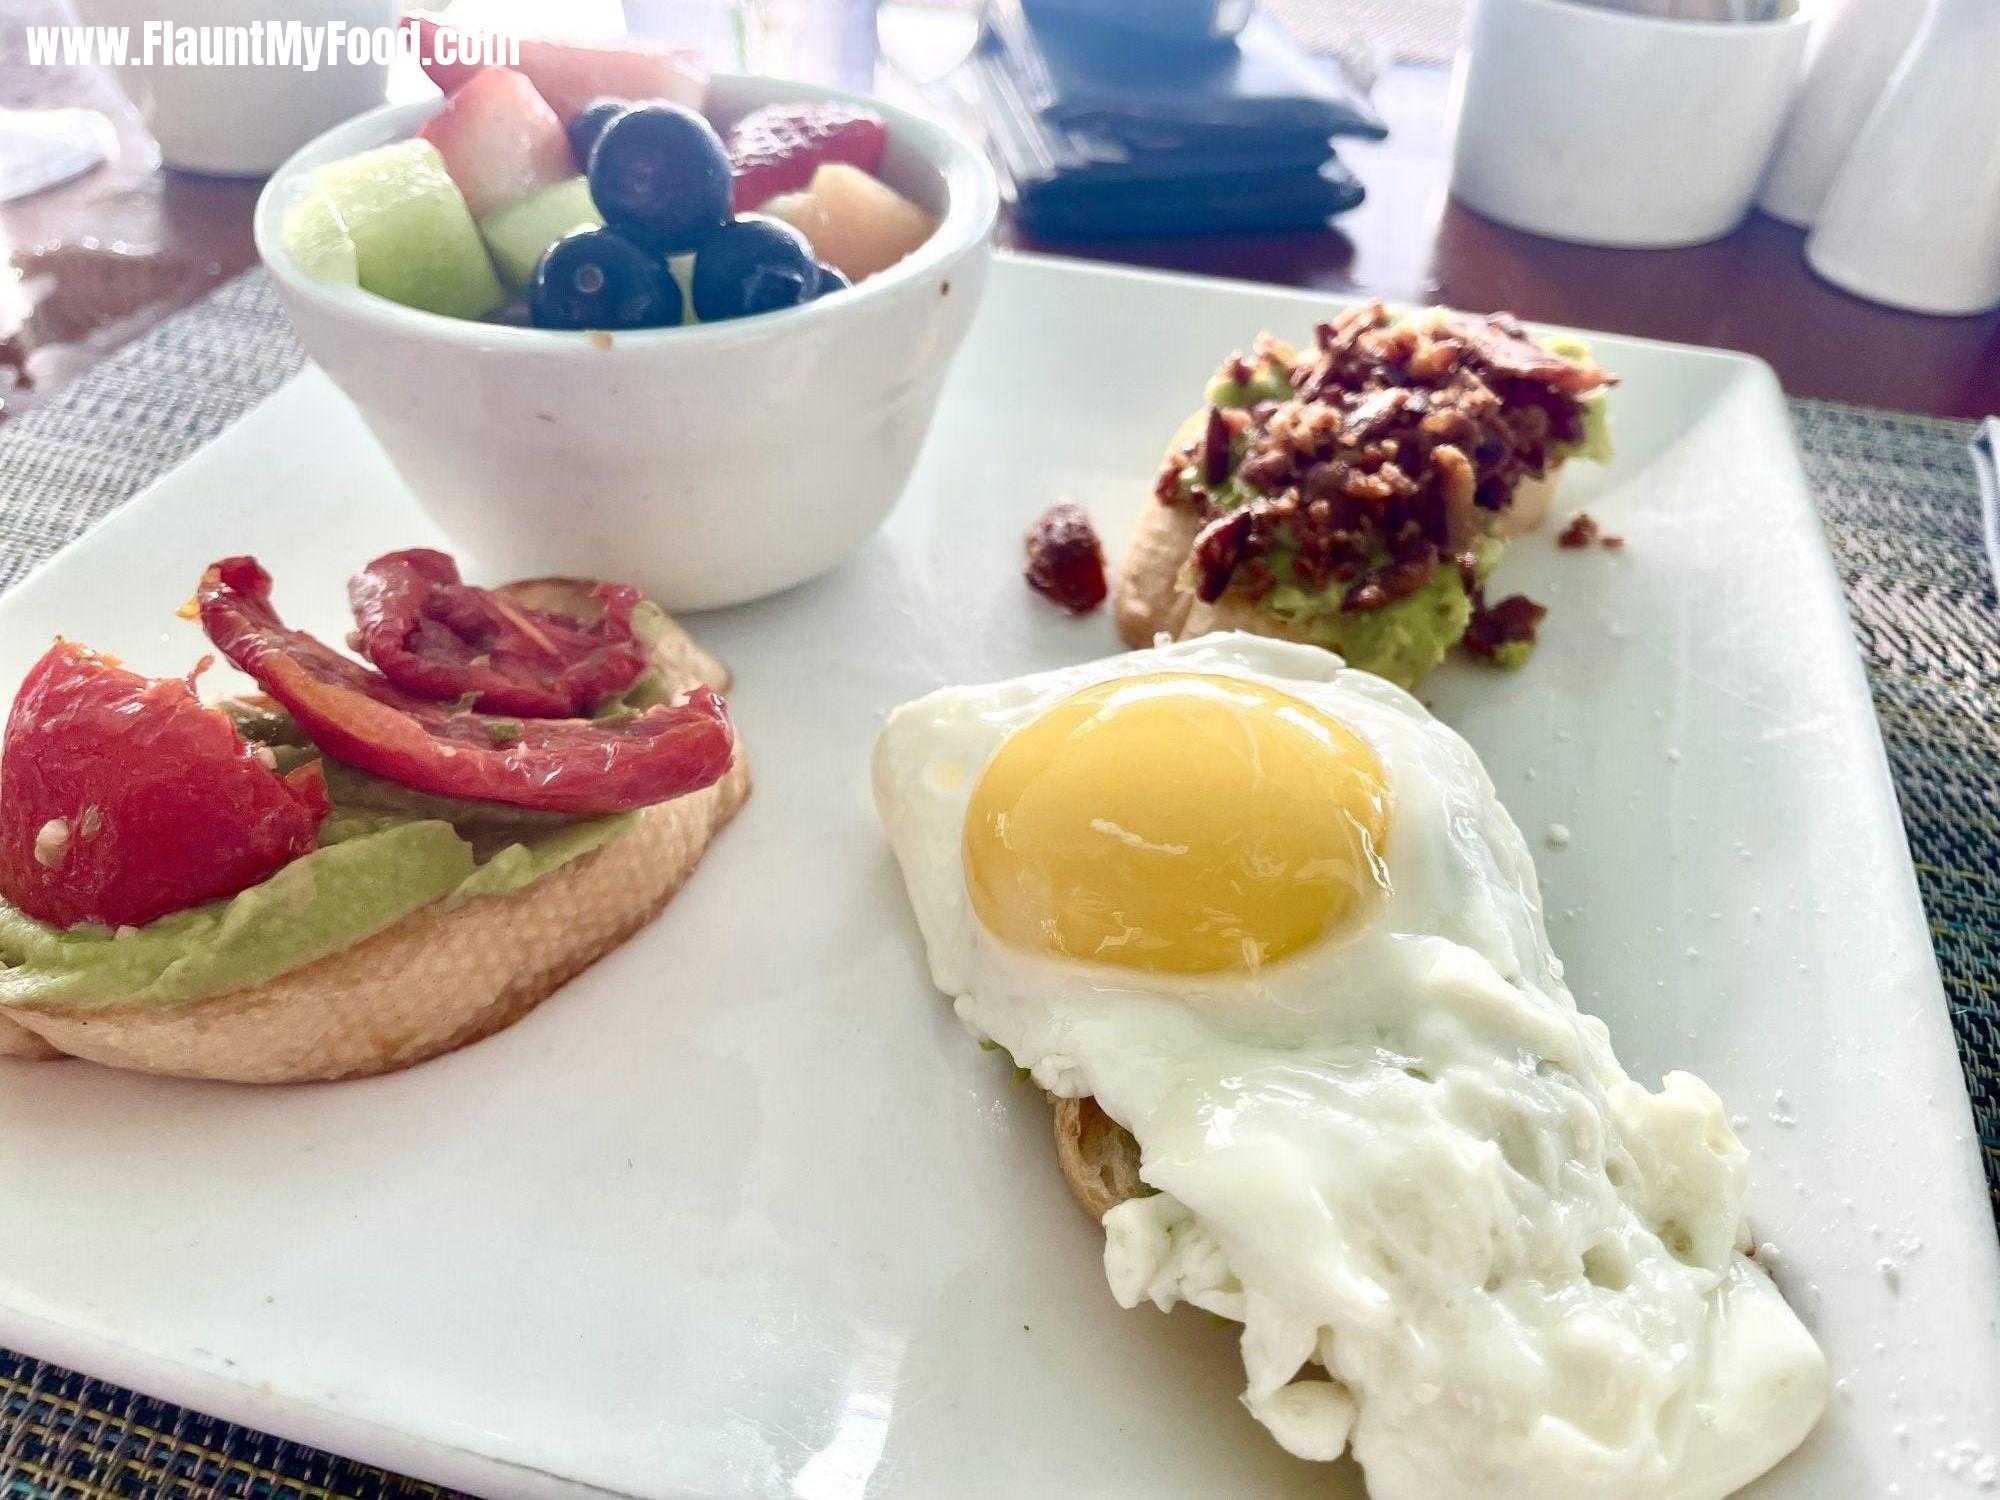 Southern Most Beach Resort Cafe, Key West FloridaAn amazing breakfast at Southern Most Beach Resort Cafe, Key West Florida. Avocado Trio - Multigrain Baguette, Avocado Mousse, Bacon, Roasted Tomatoes, Sunny Side up Egg with a Side of Fruit